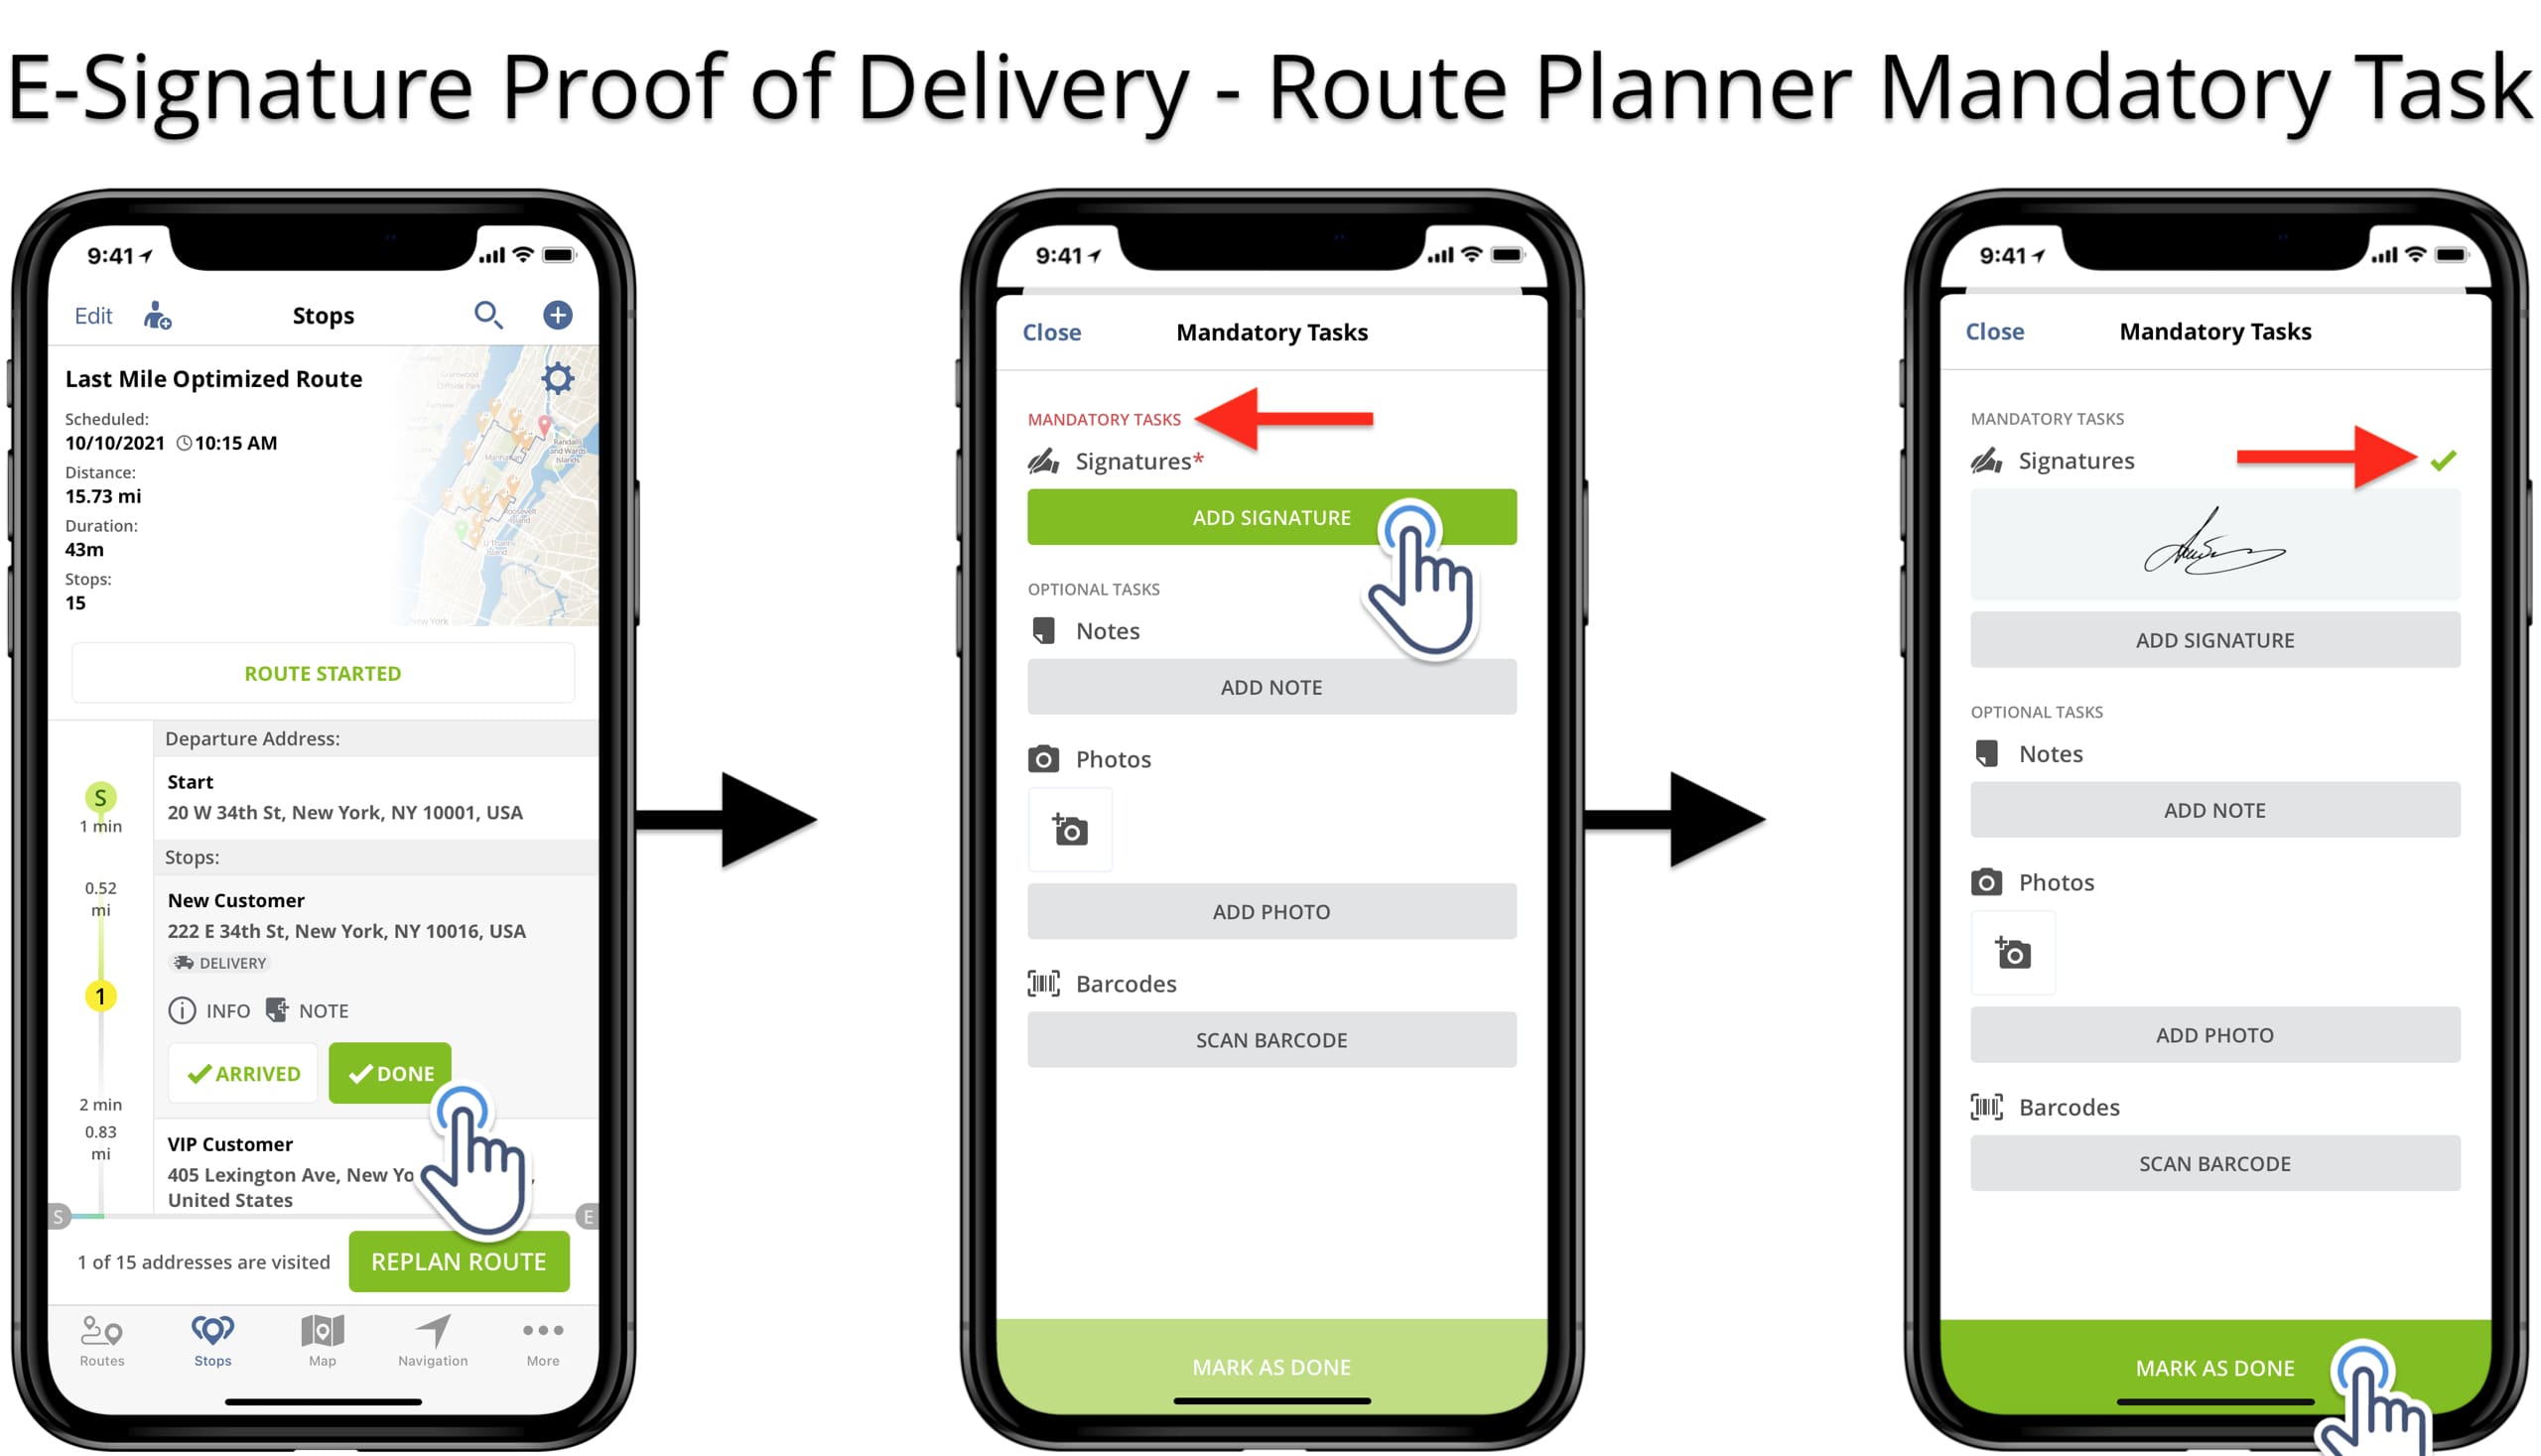 Route planner mandatory tasks for collecting electronic signatures as proof of delivery.